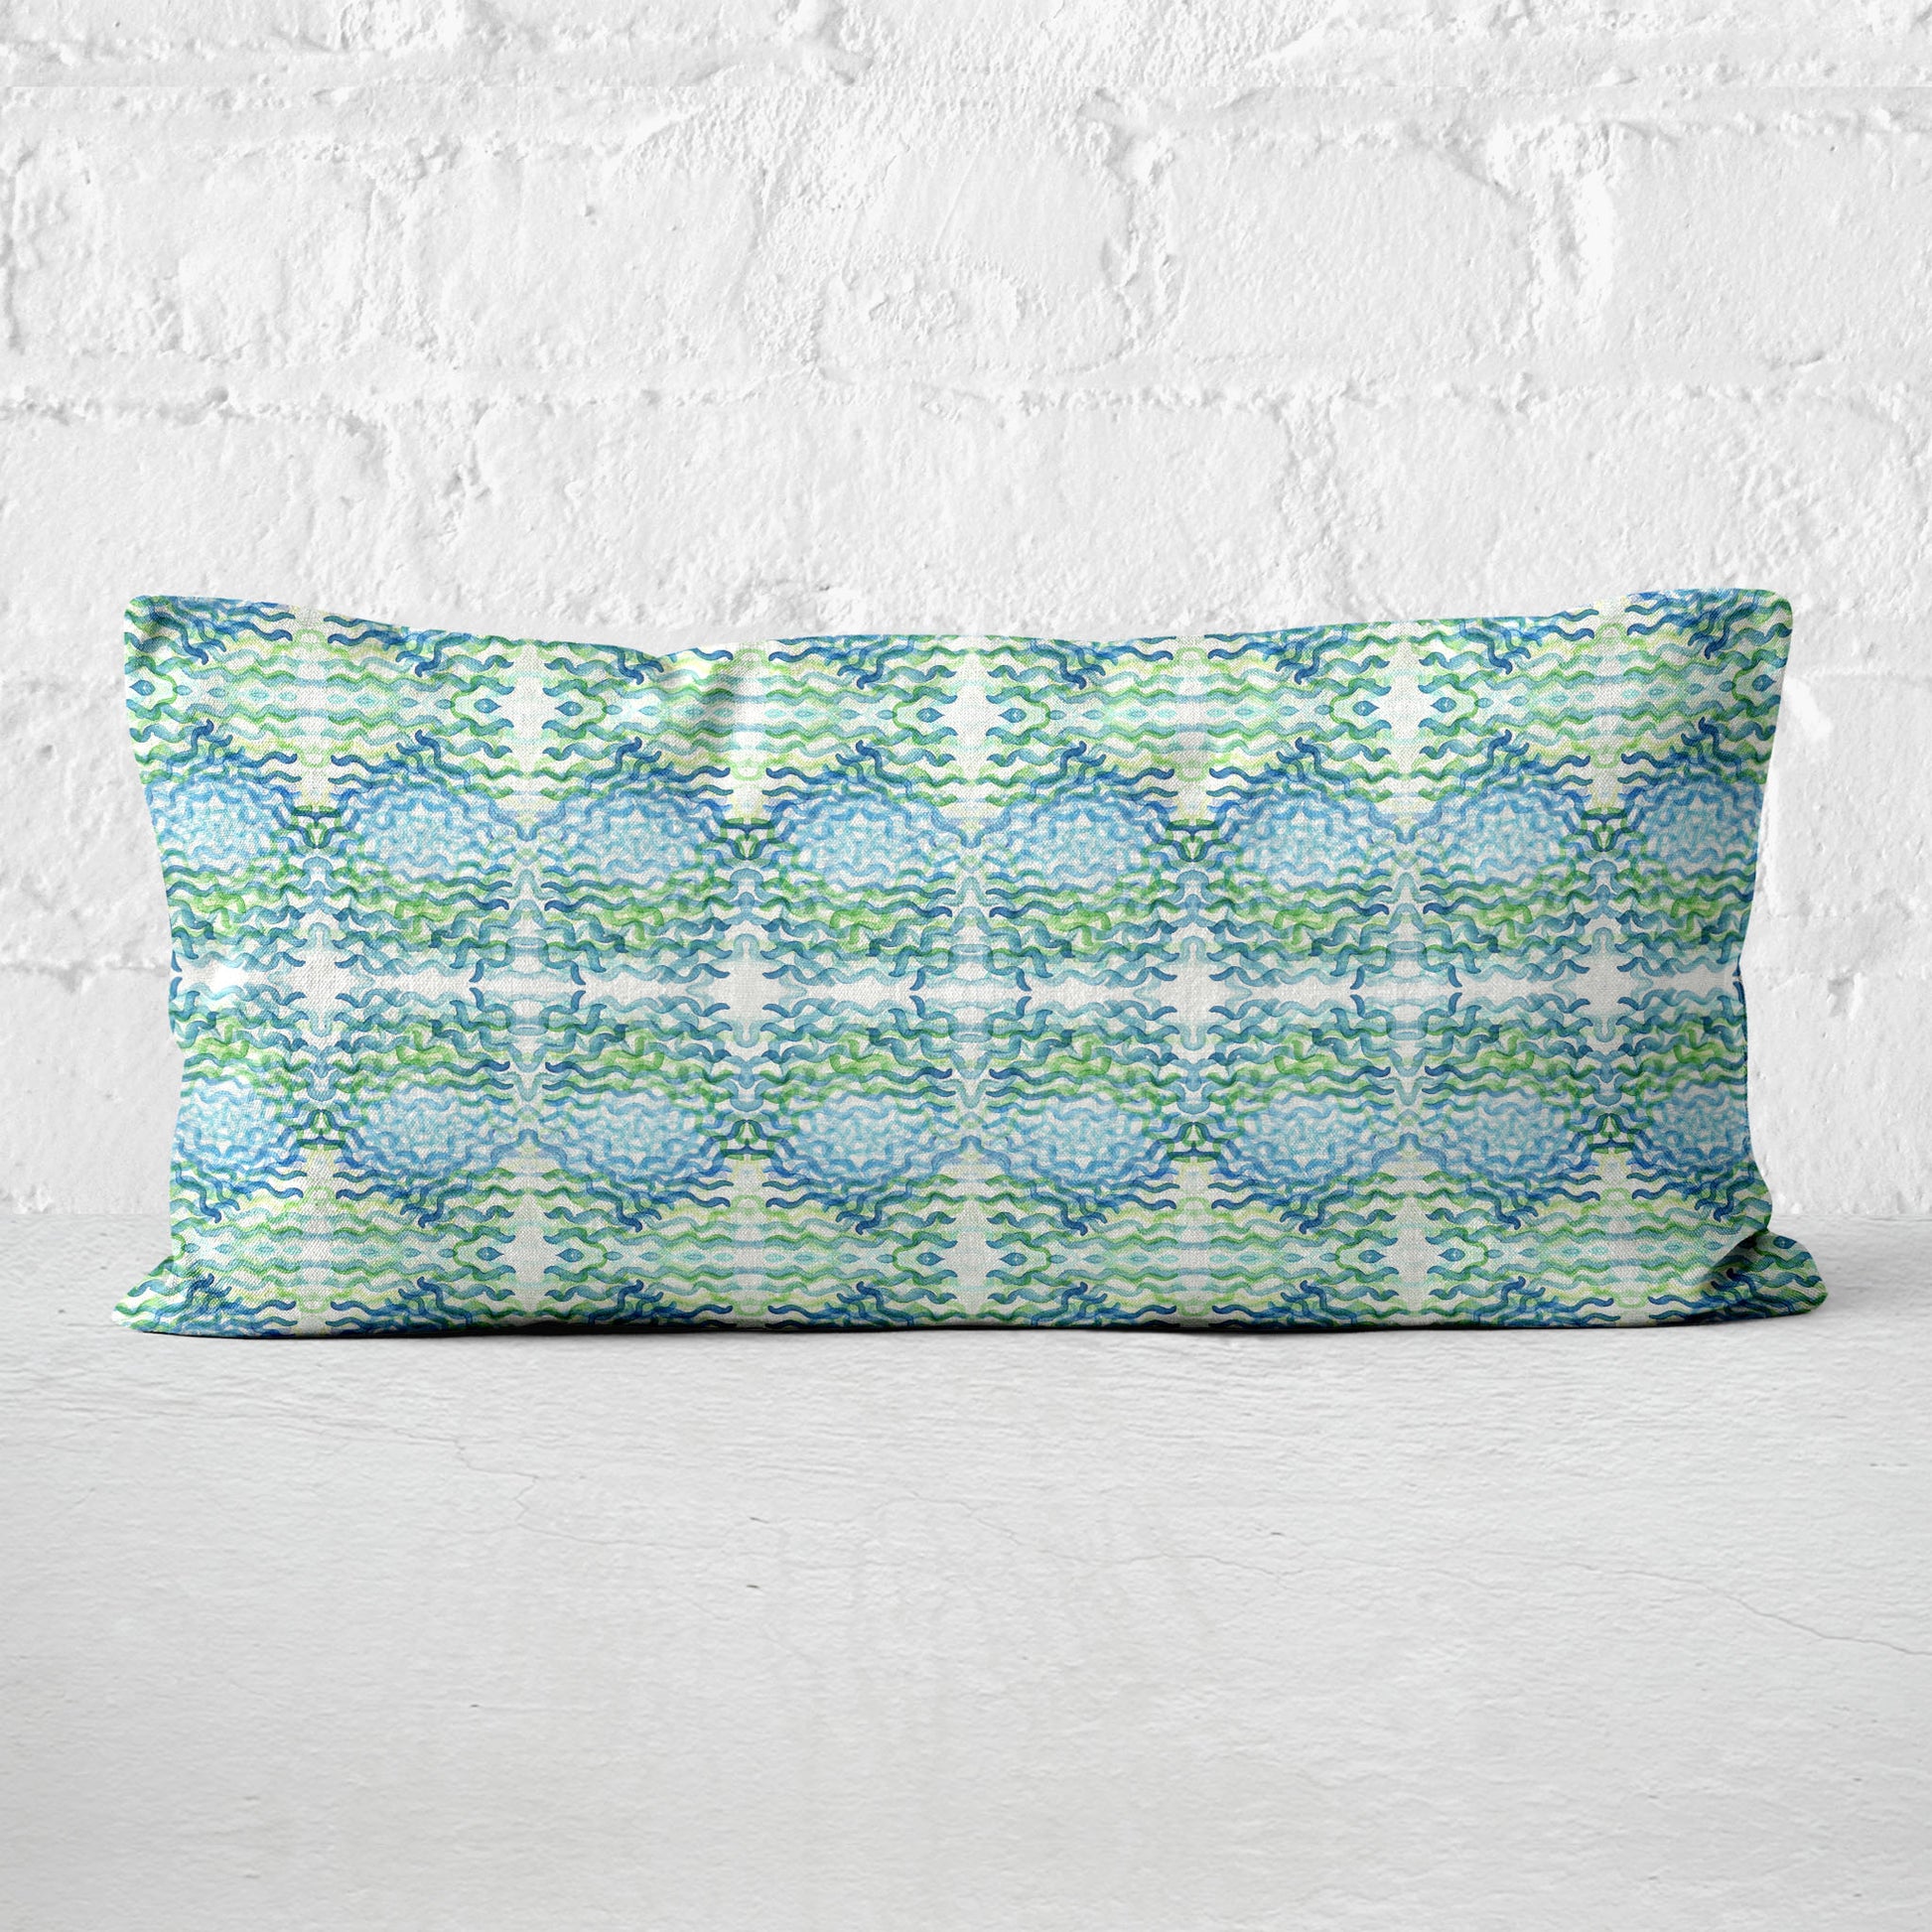 12x24 lumbar pillow featuring an abstract hand-painted pattern in green and blue leaning against a white brick wall.